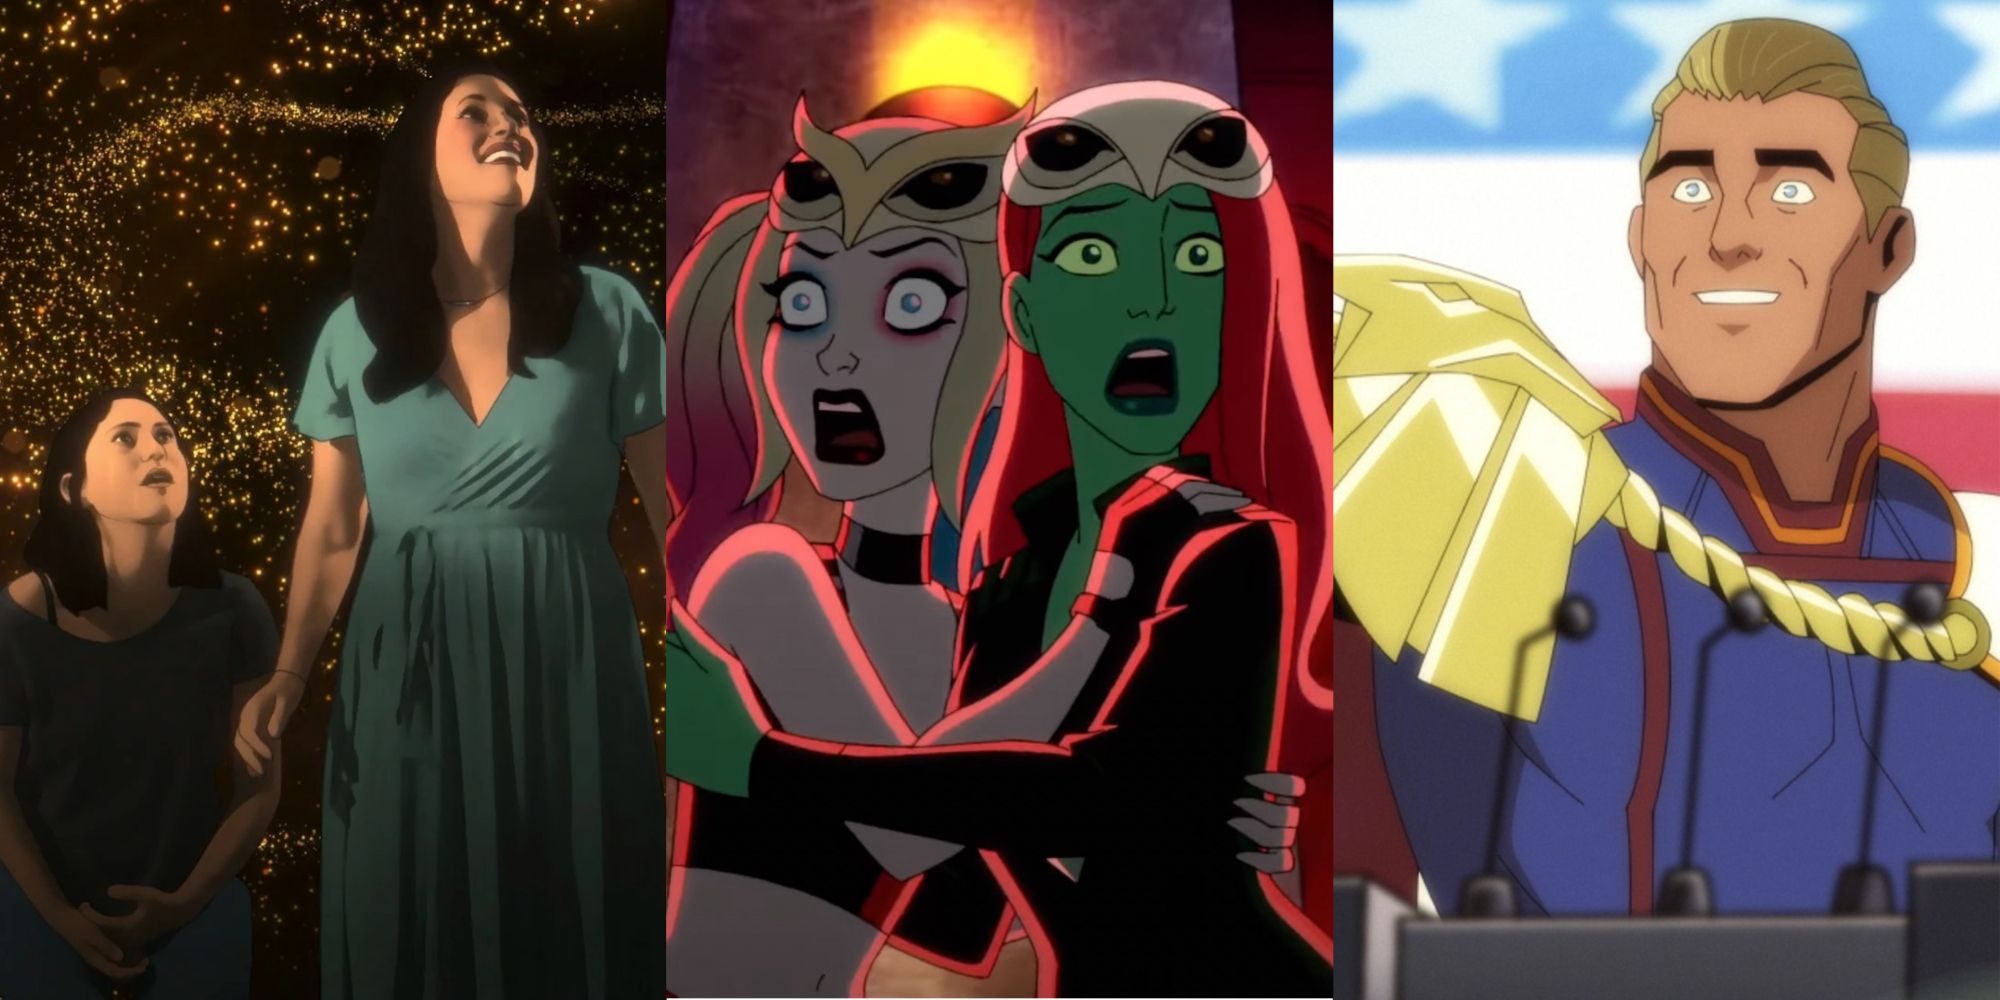 A split image of Alma and Becca in Undone, Harley and Poison Ivy in Harley Quinn, and Homelander in The Boys Presents: Diabolical